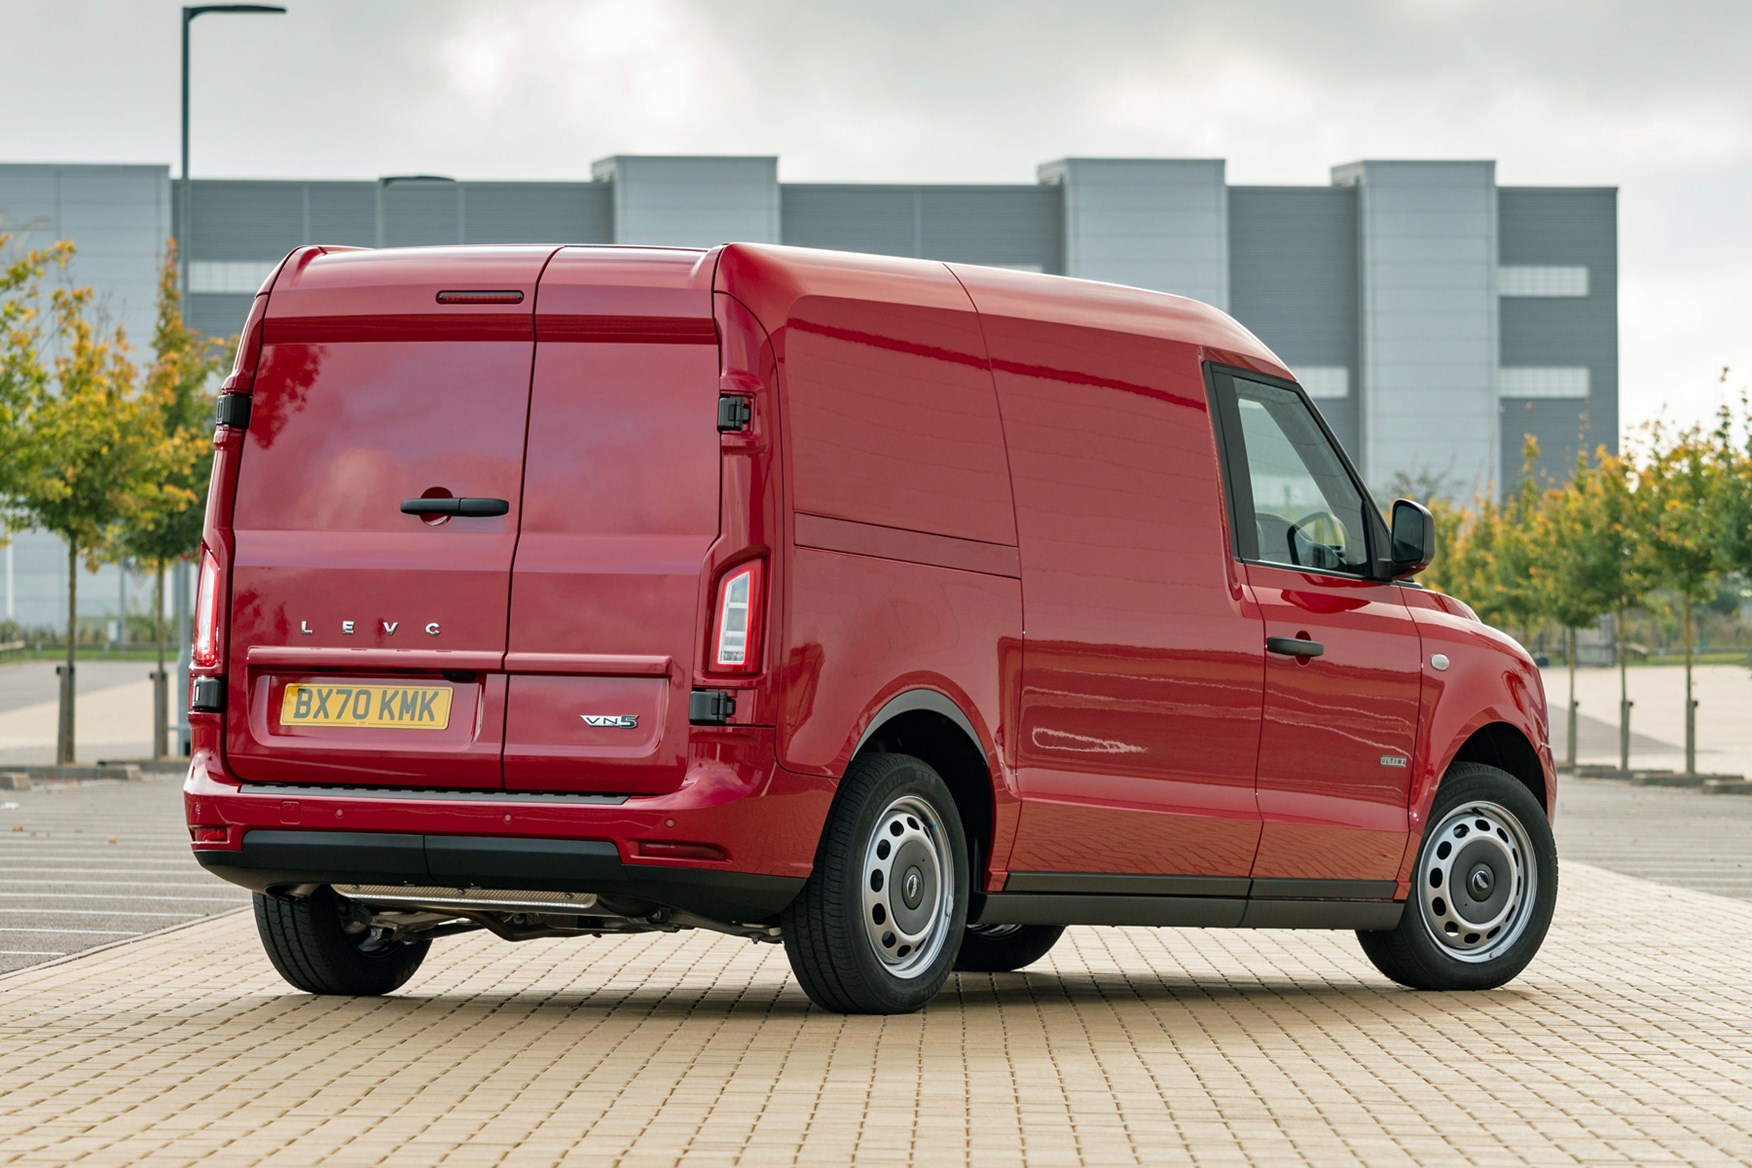 LEVC VN5 electric van review - 2020, rear view, red